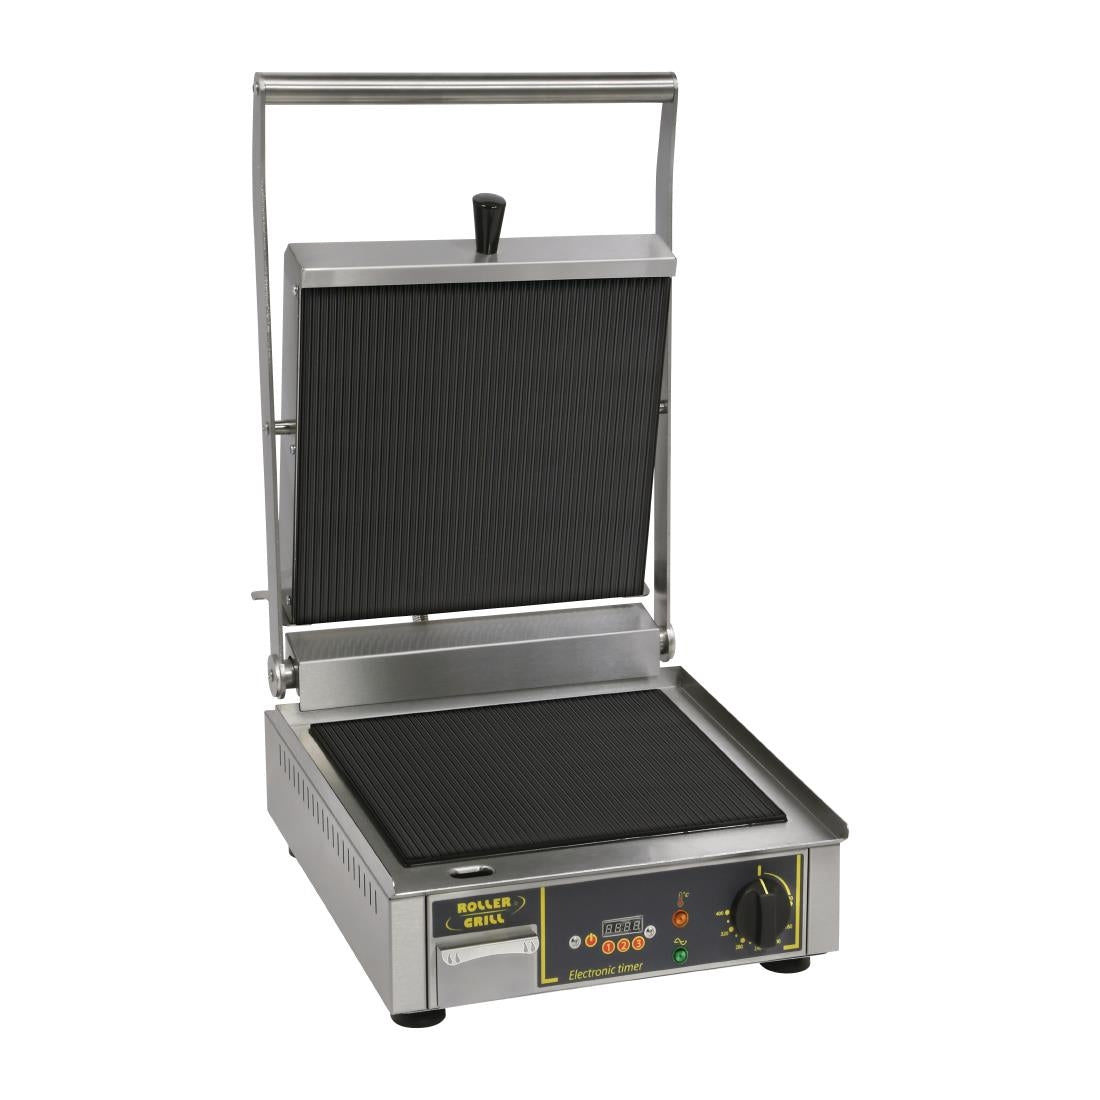 FE144 Roller Grill Premium VC R Single Ribbed Contact Grill JD Catering Equipment Solutions Ltd